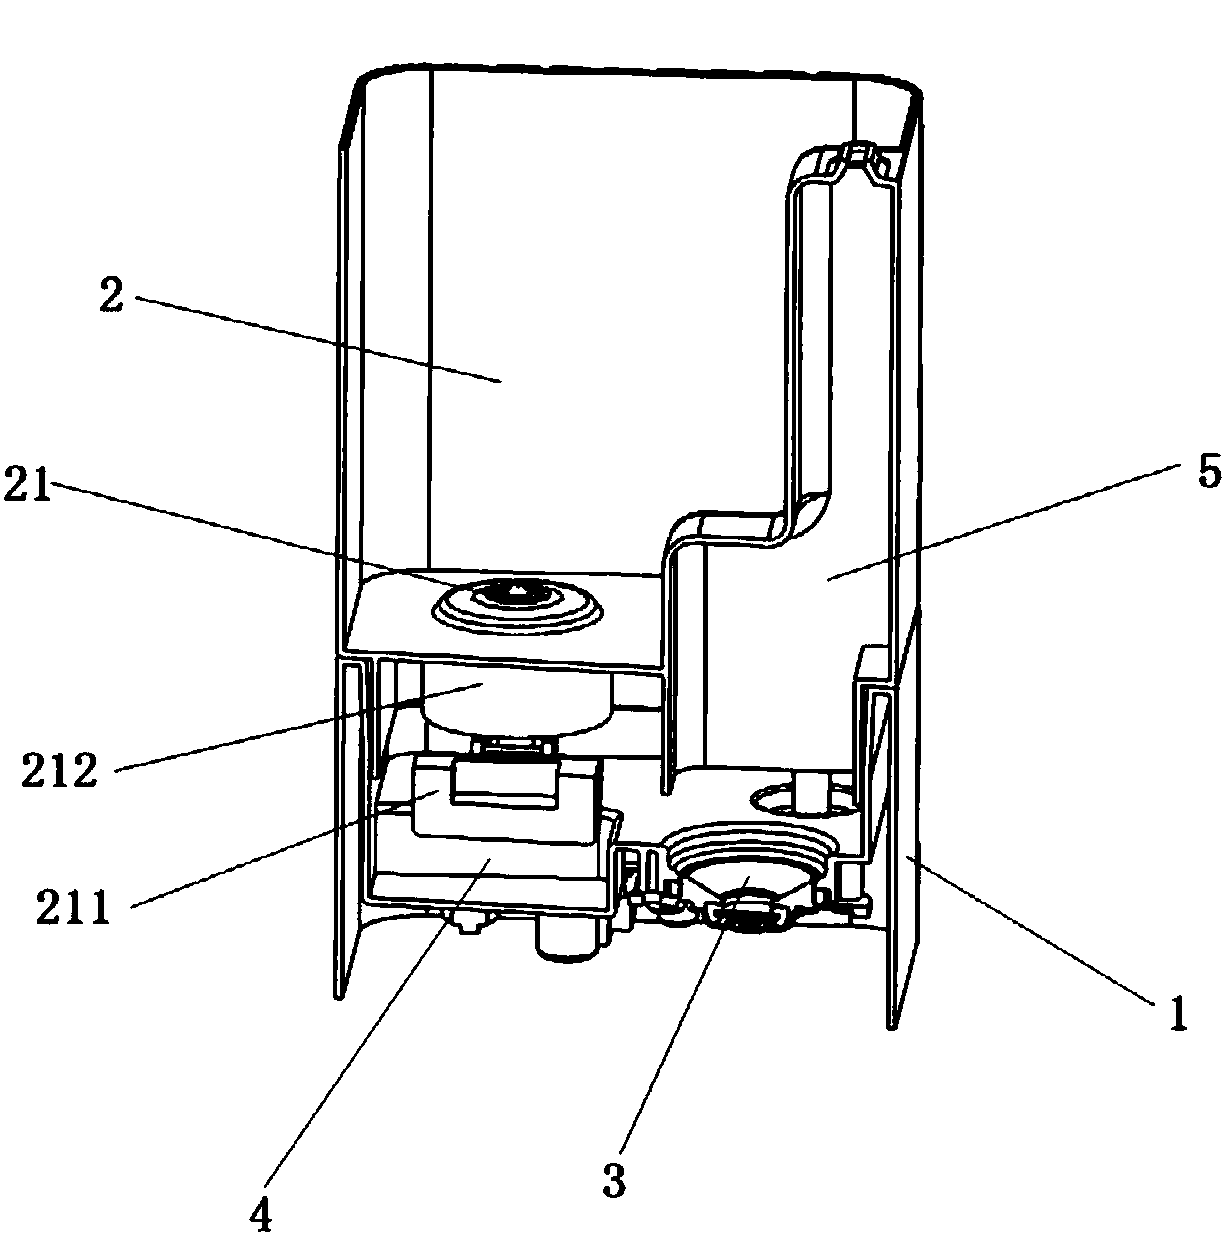 Humidifier with double-valve structure